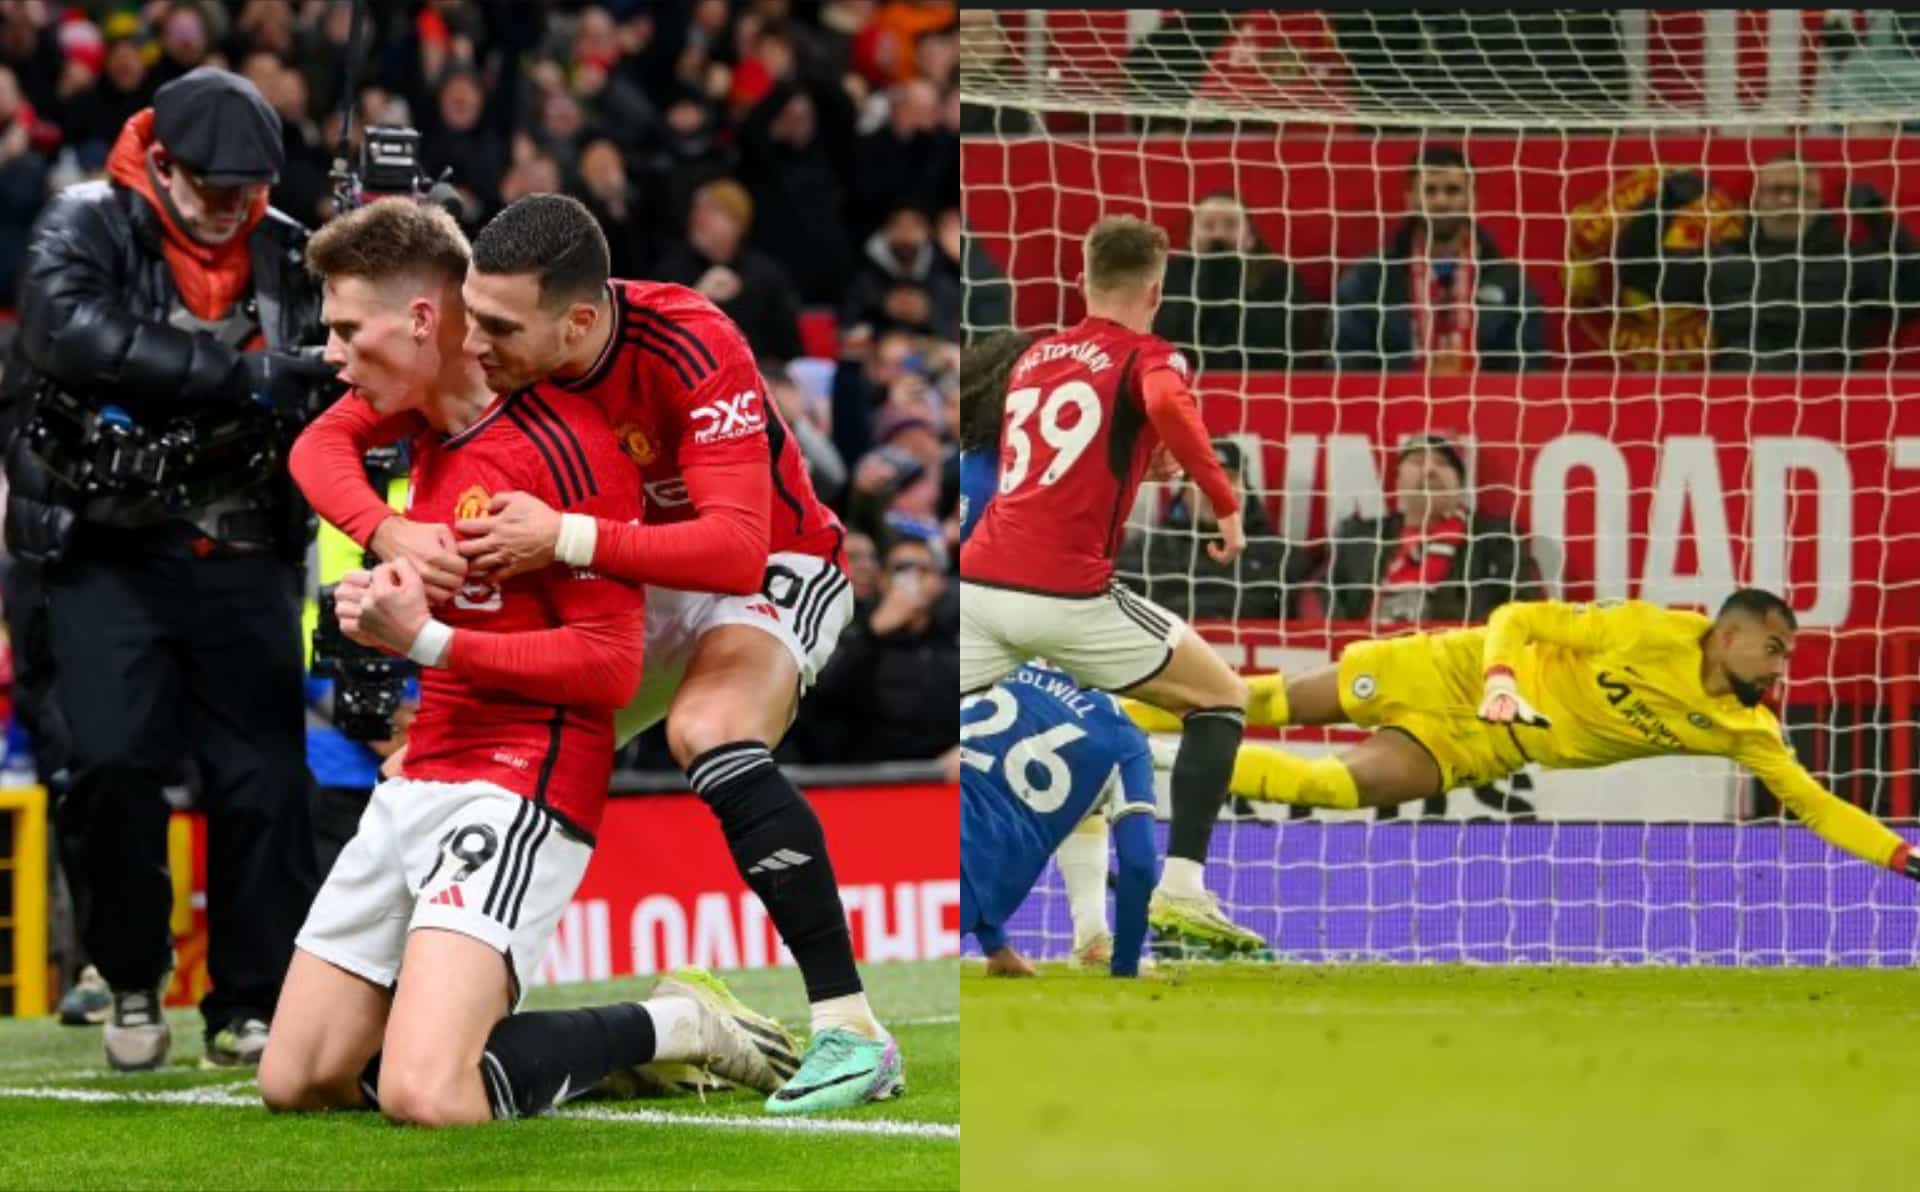 McTominay brace secures crucial win for Manchester United against Chelsea